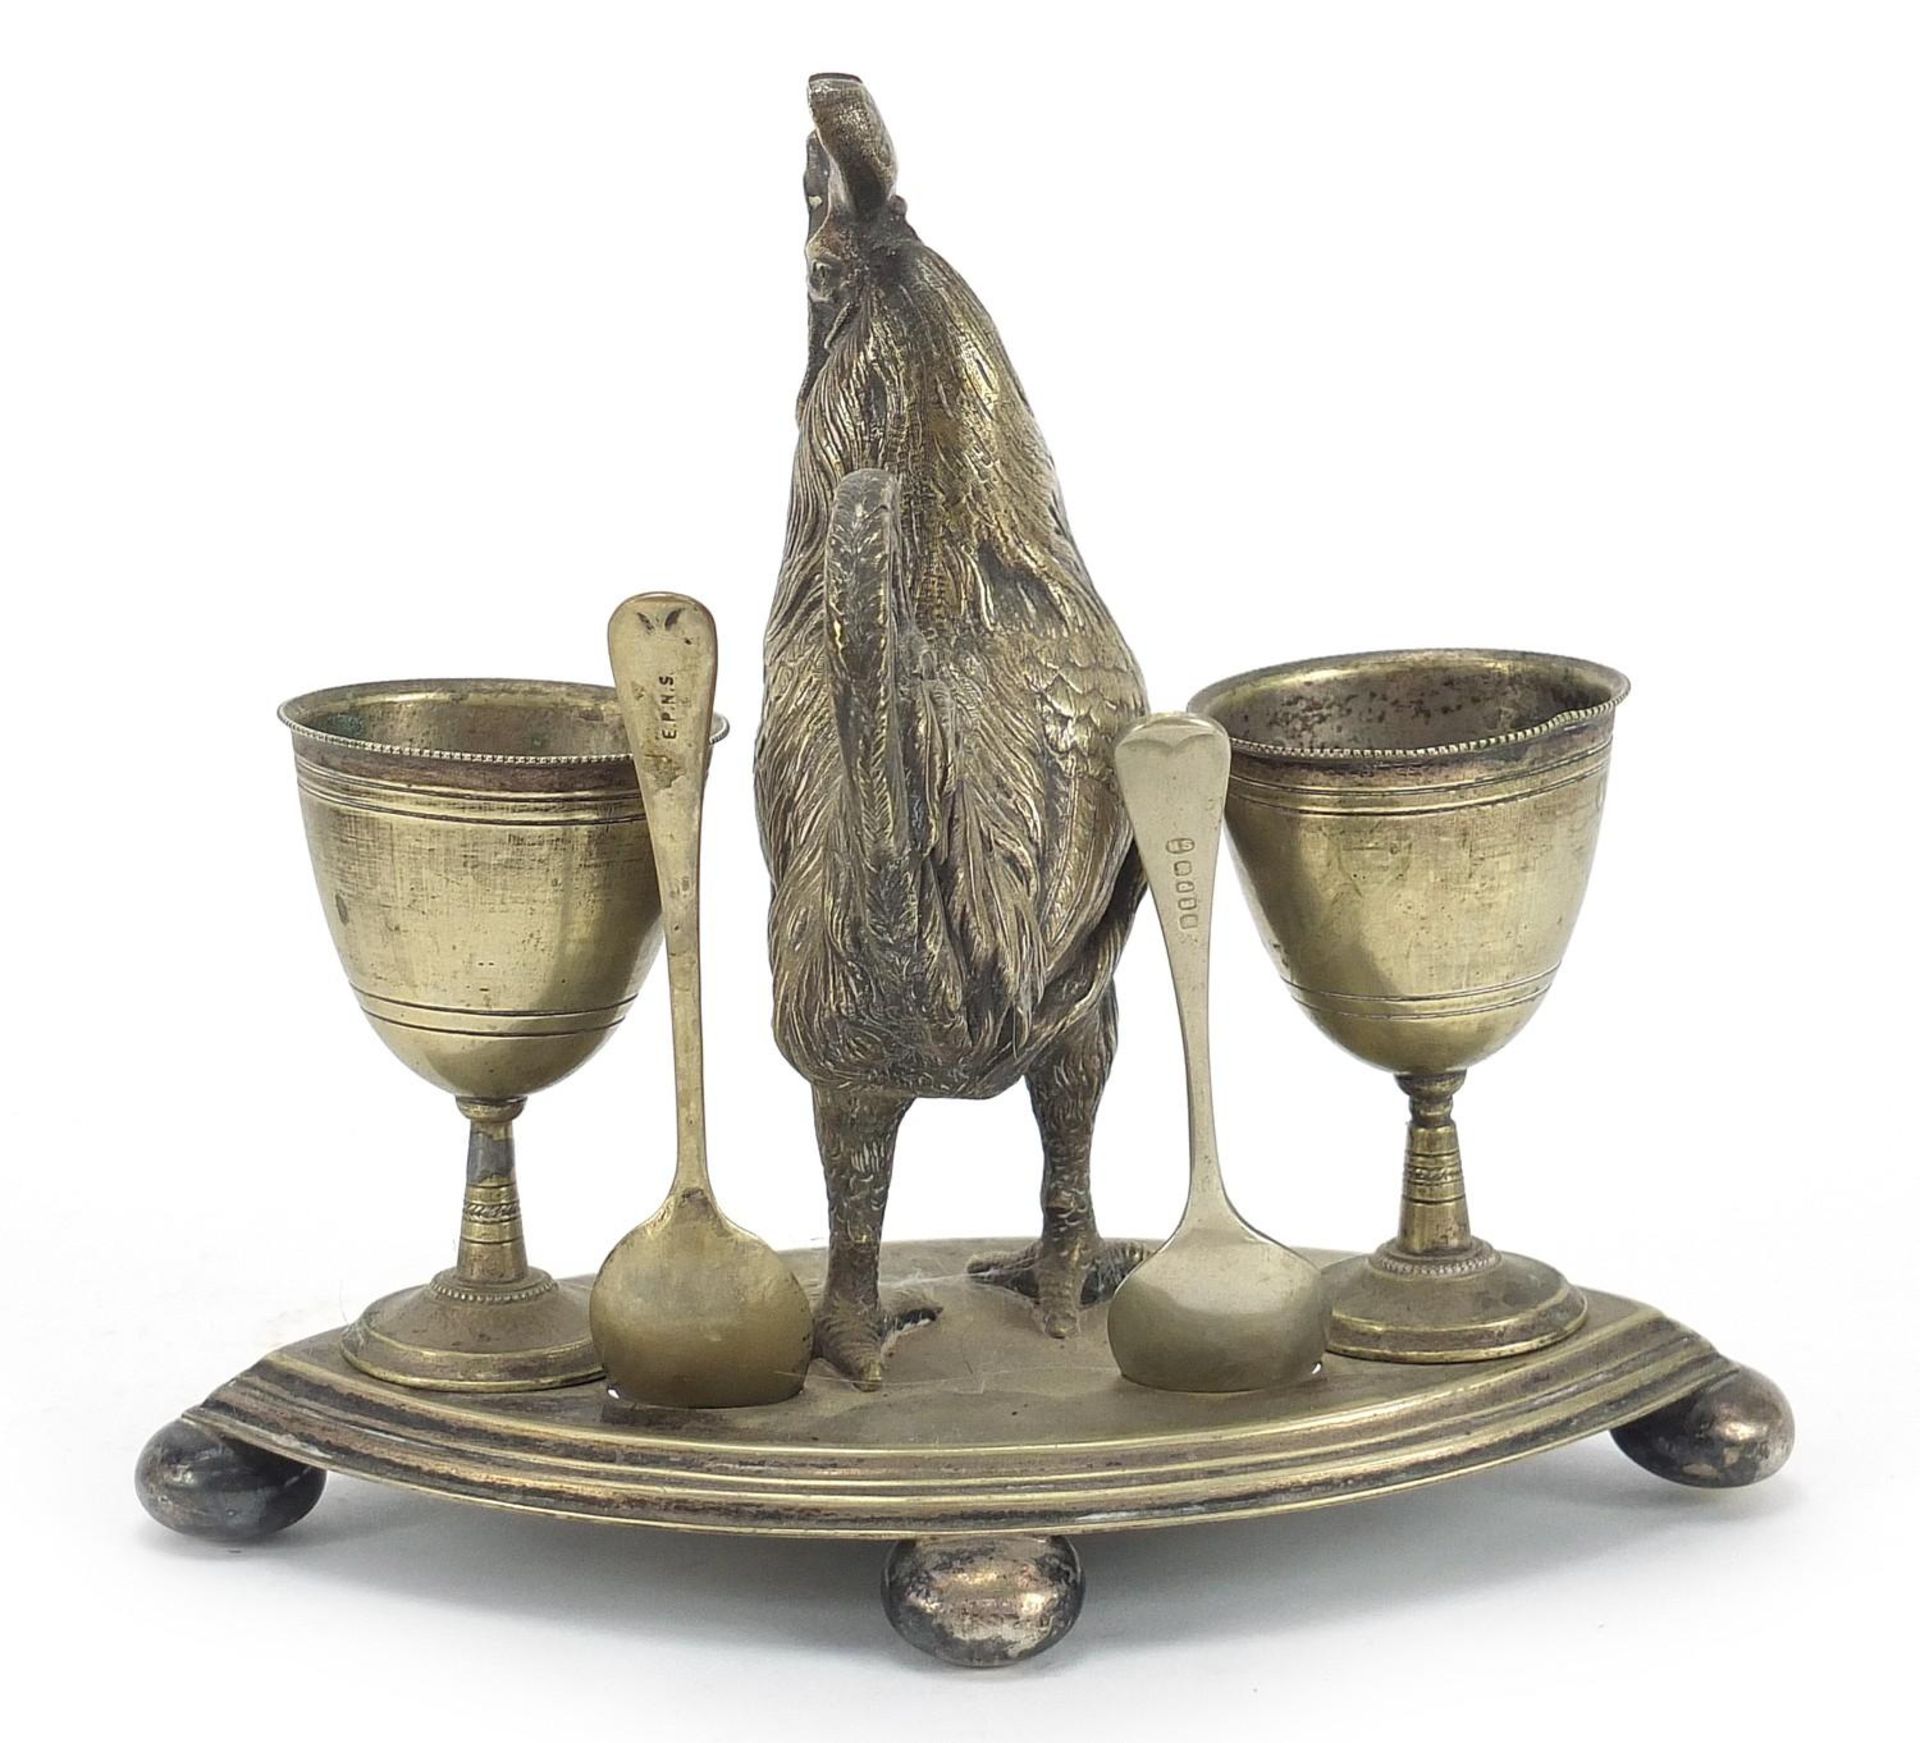 Novelty silver plated cockerel design egg cup stand with spoons, 16cm high : - Image 2 of 4